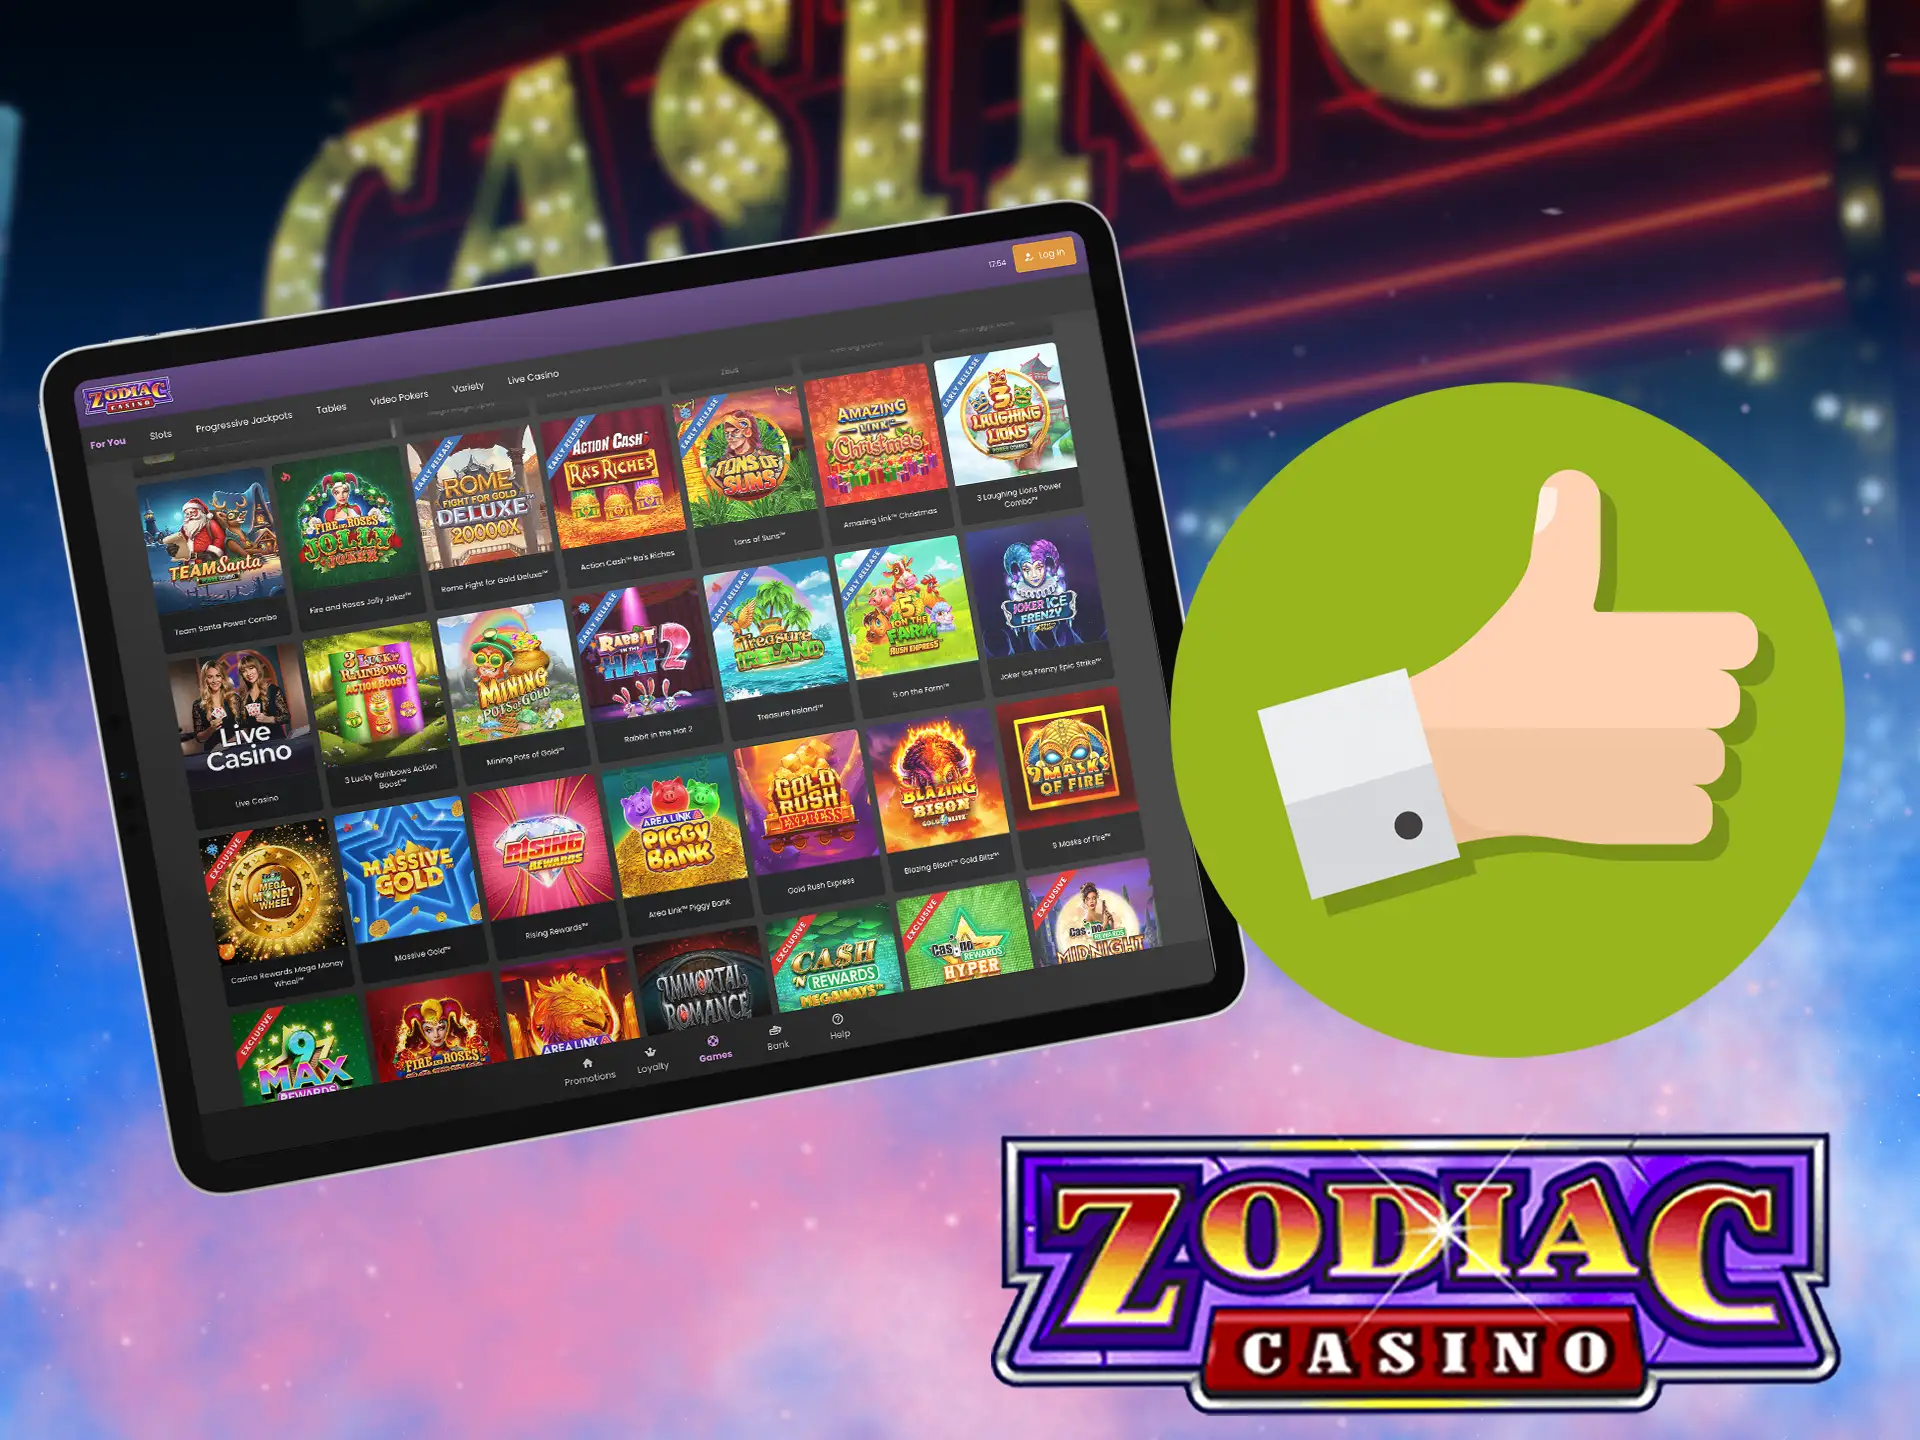 Zodiac Casino has a very developed affiliate program, you can bring a friend, acquaintance, and for this you can get cash rewards.